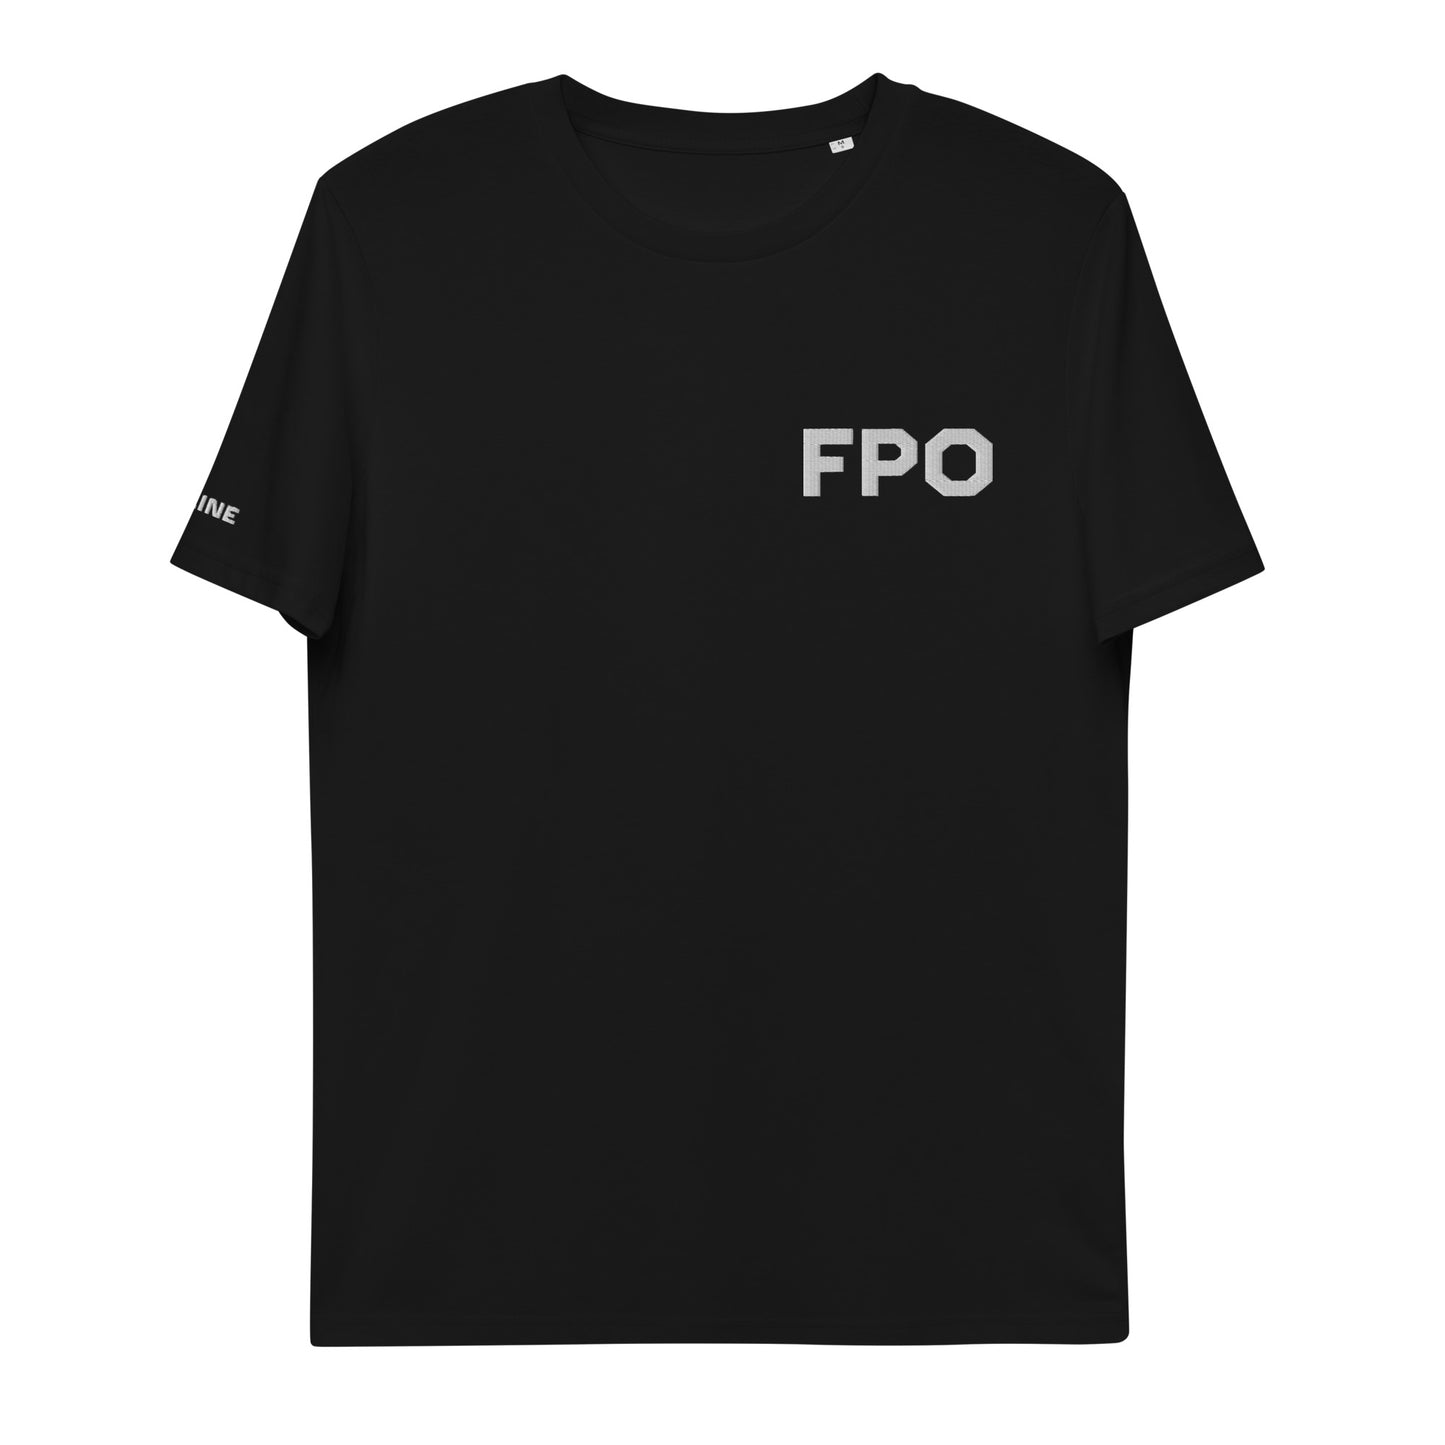 FPO Embroidered Unisex organic cotton t-shirt